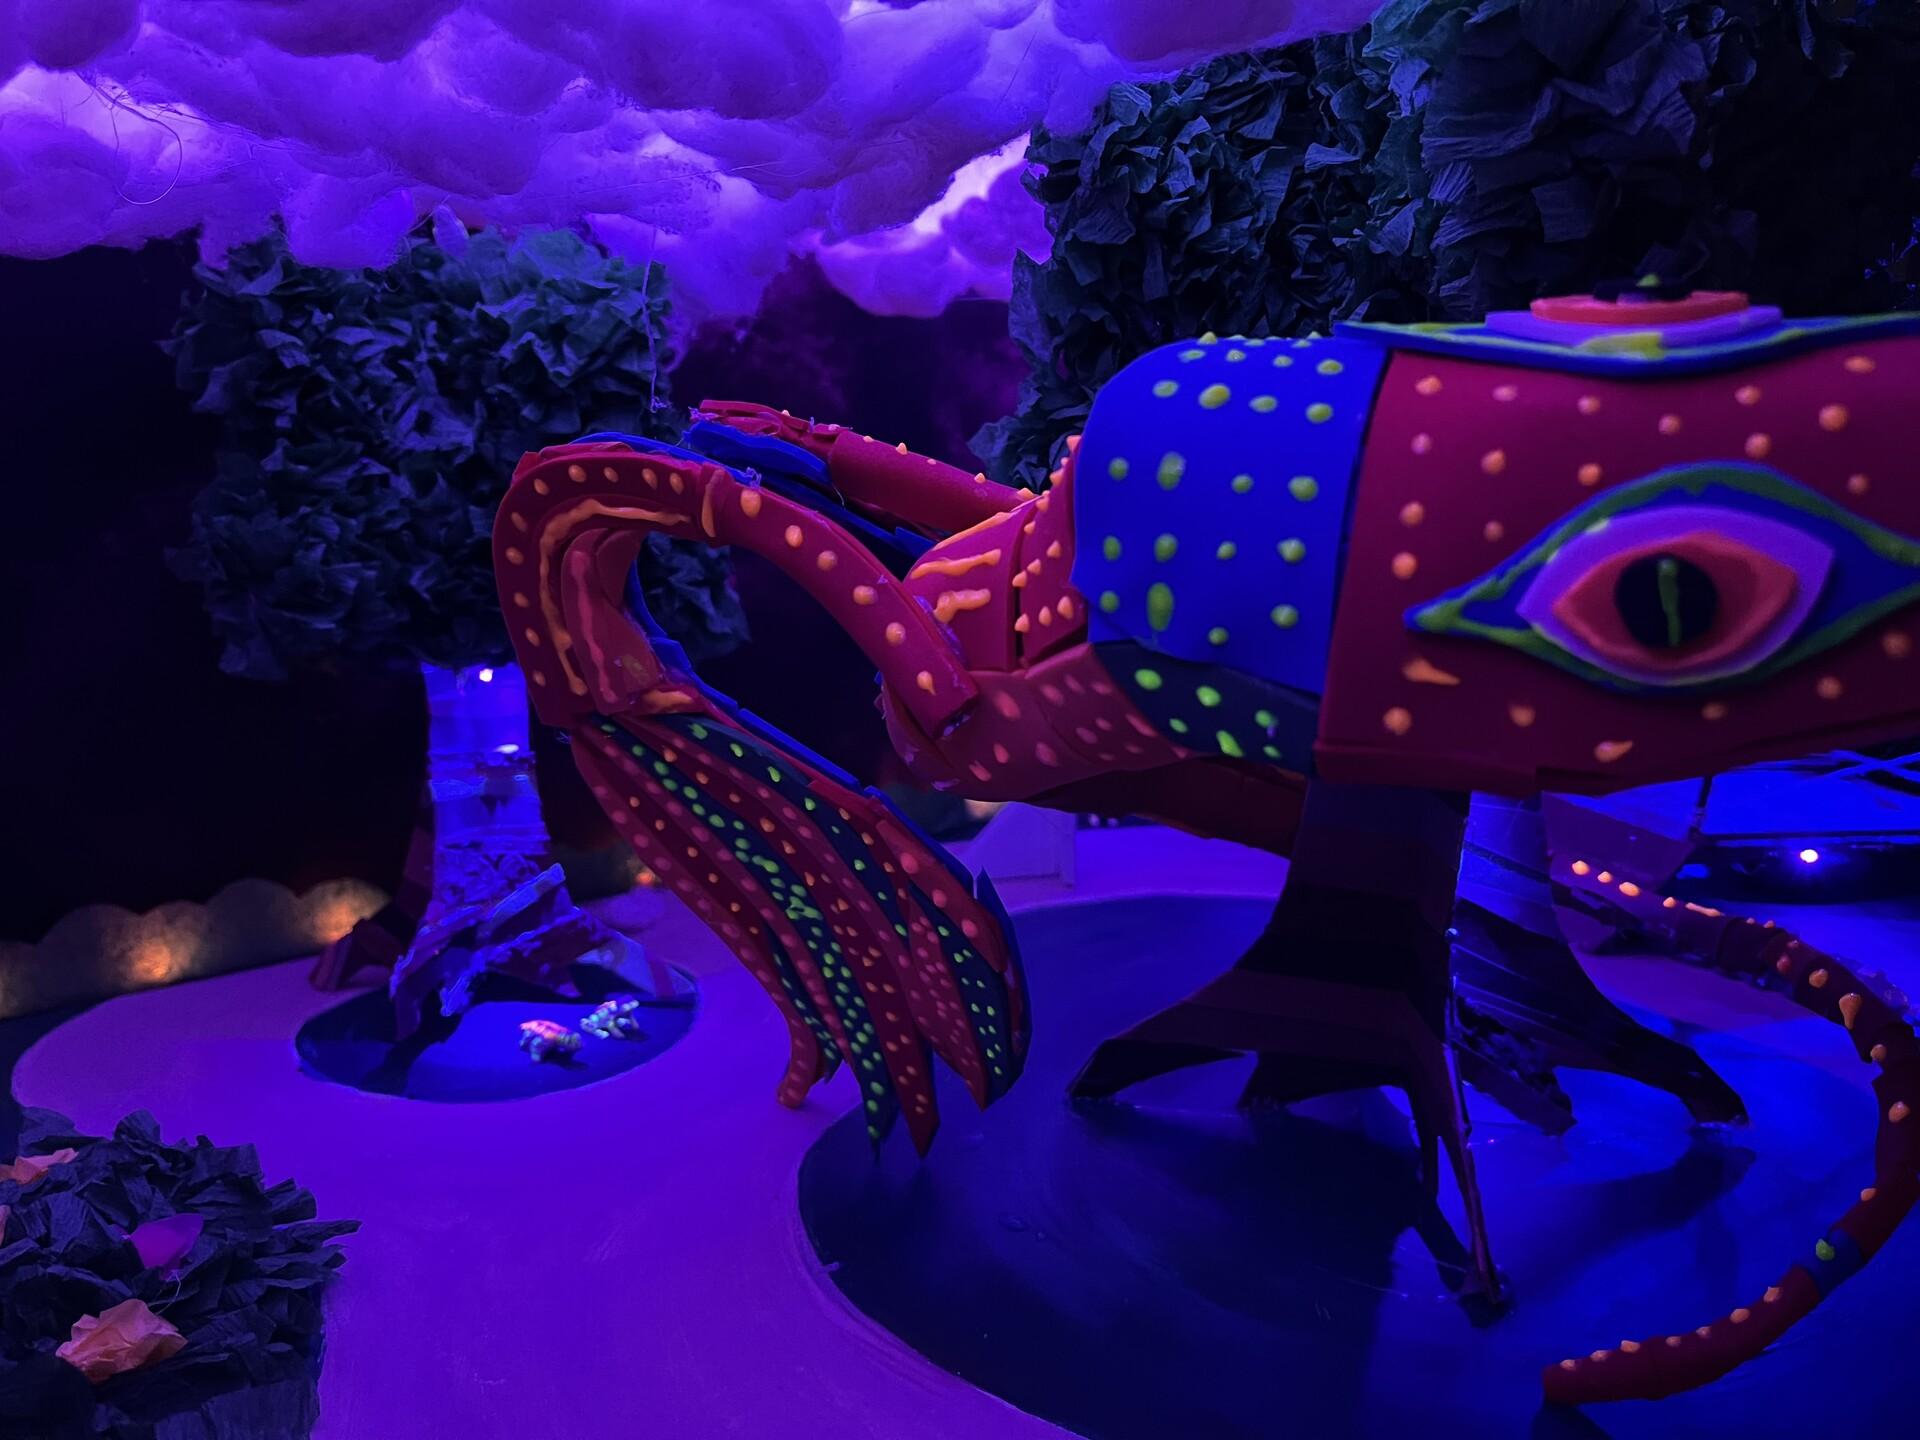 Into-the-Mind-Close-up of the big alebrije and left side of the forest